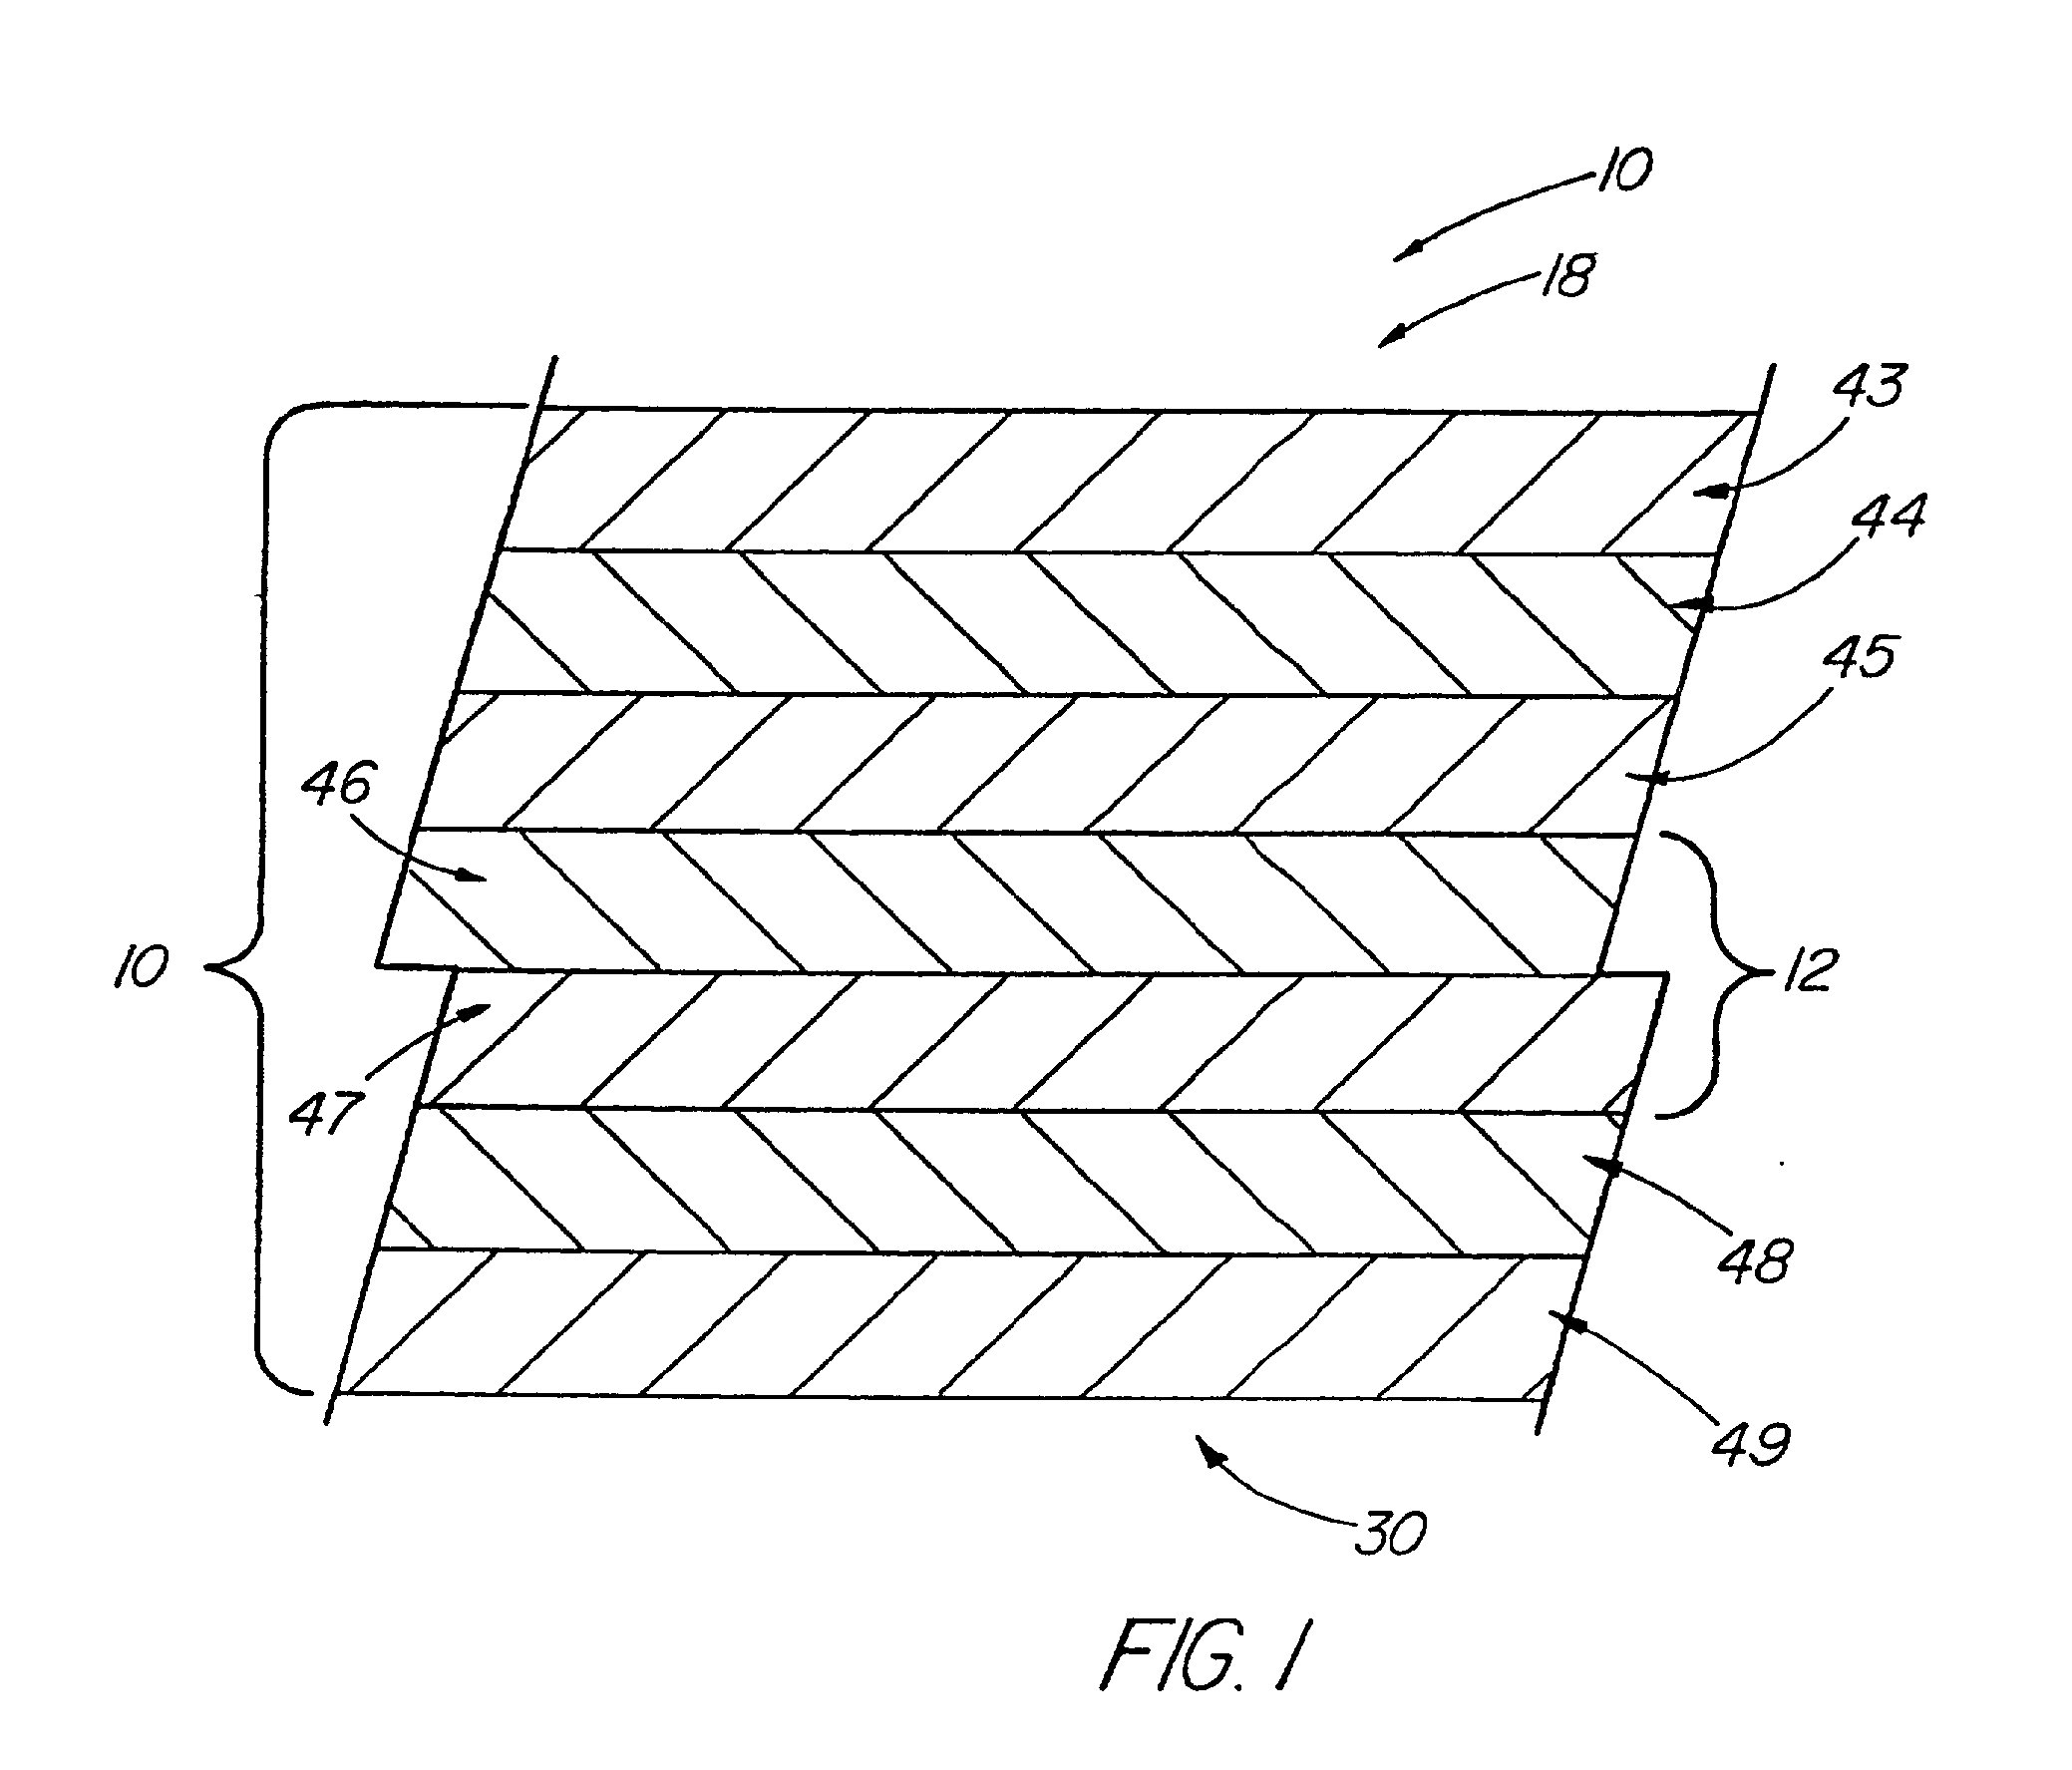 Radiopaque implantable collagenous biomaterial device